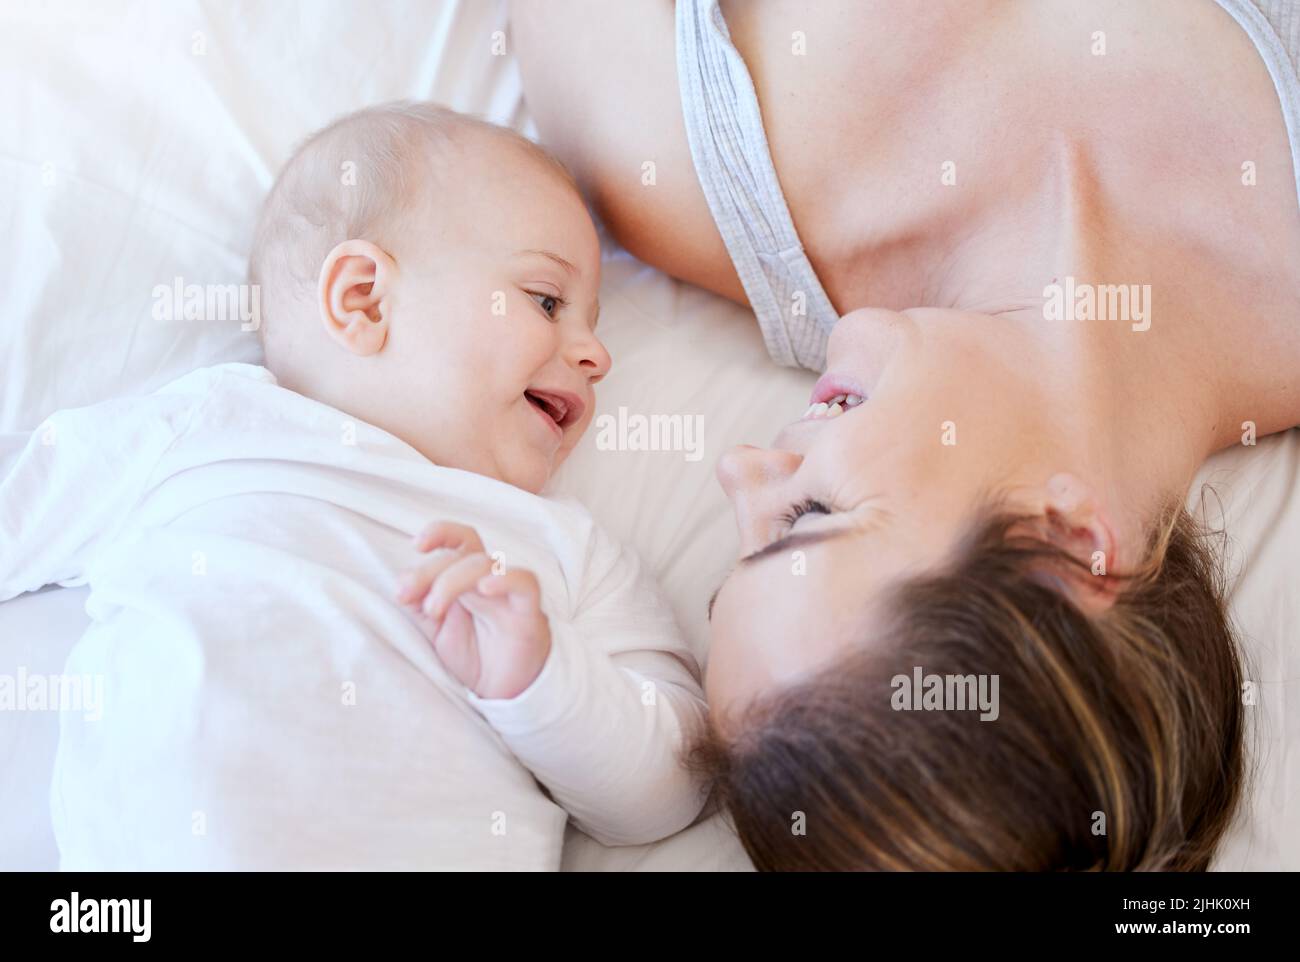 Moment that I cant miss. a young mother bonding with her adorable baby boy at home. Stock Photo